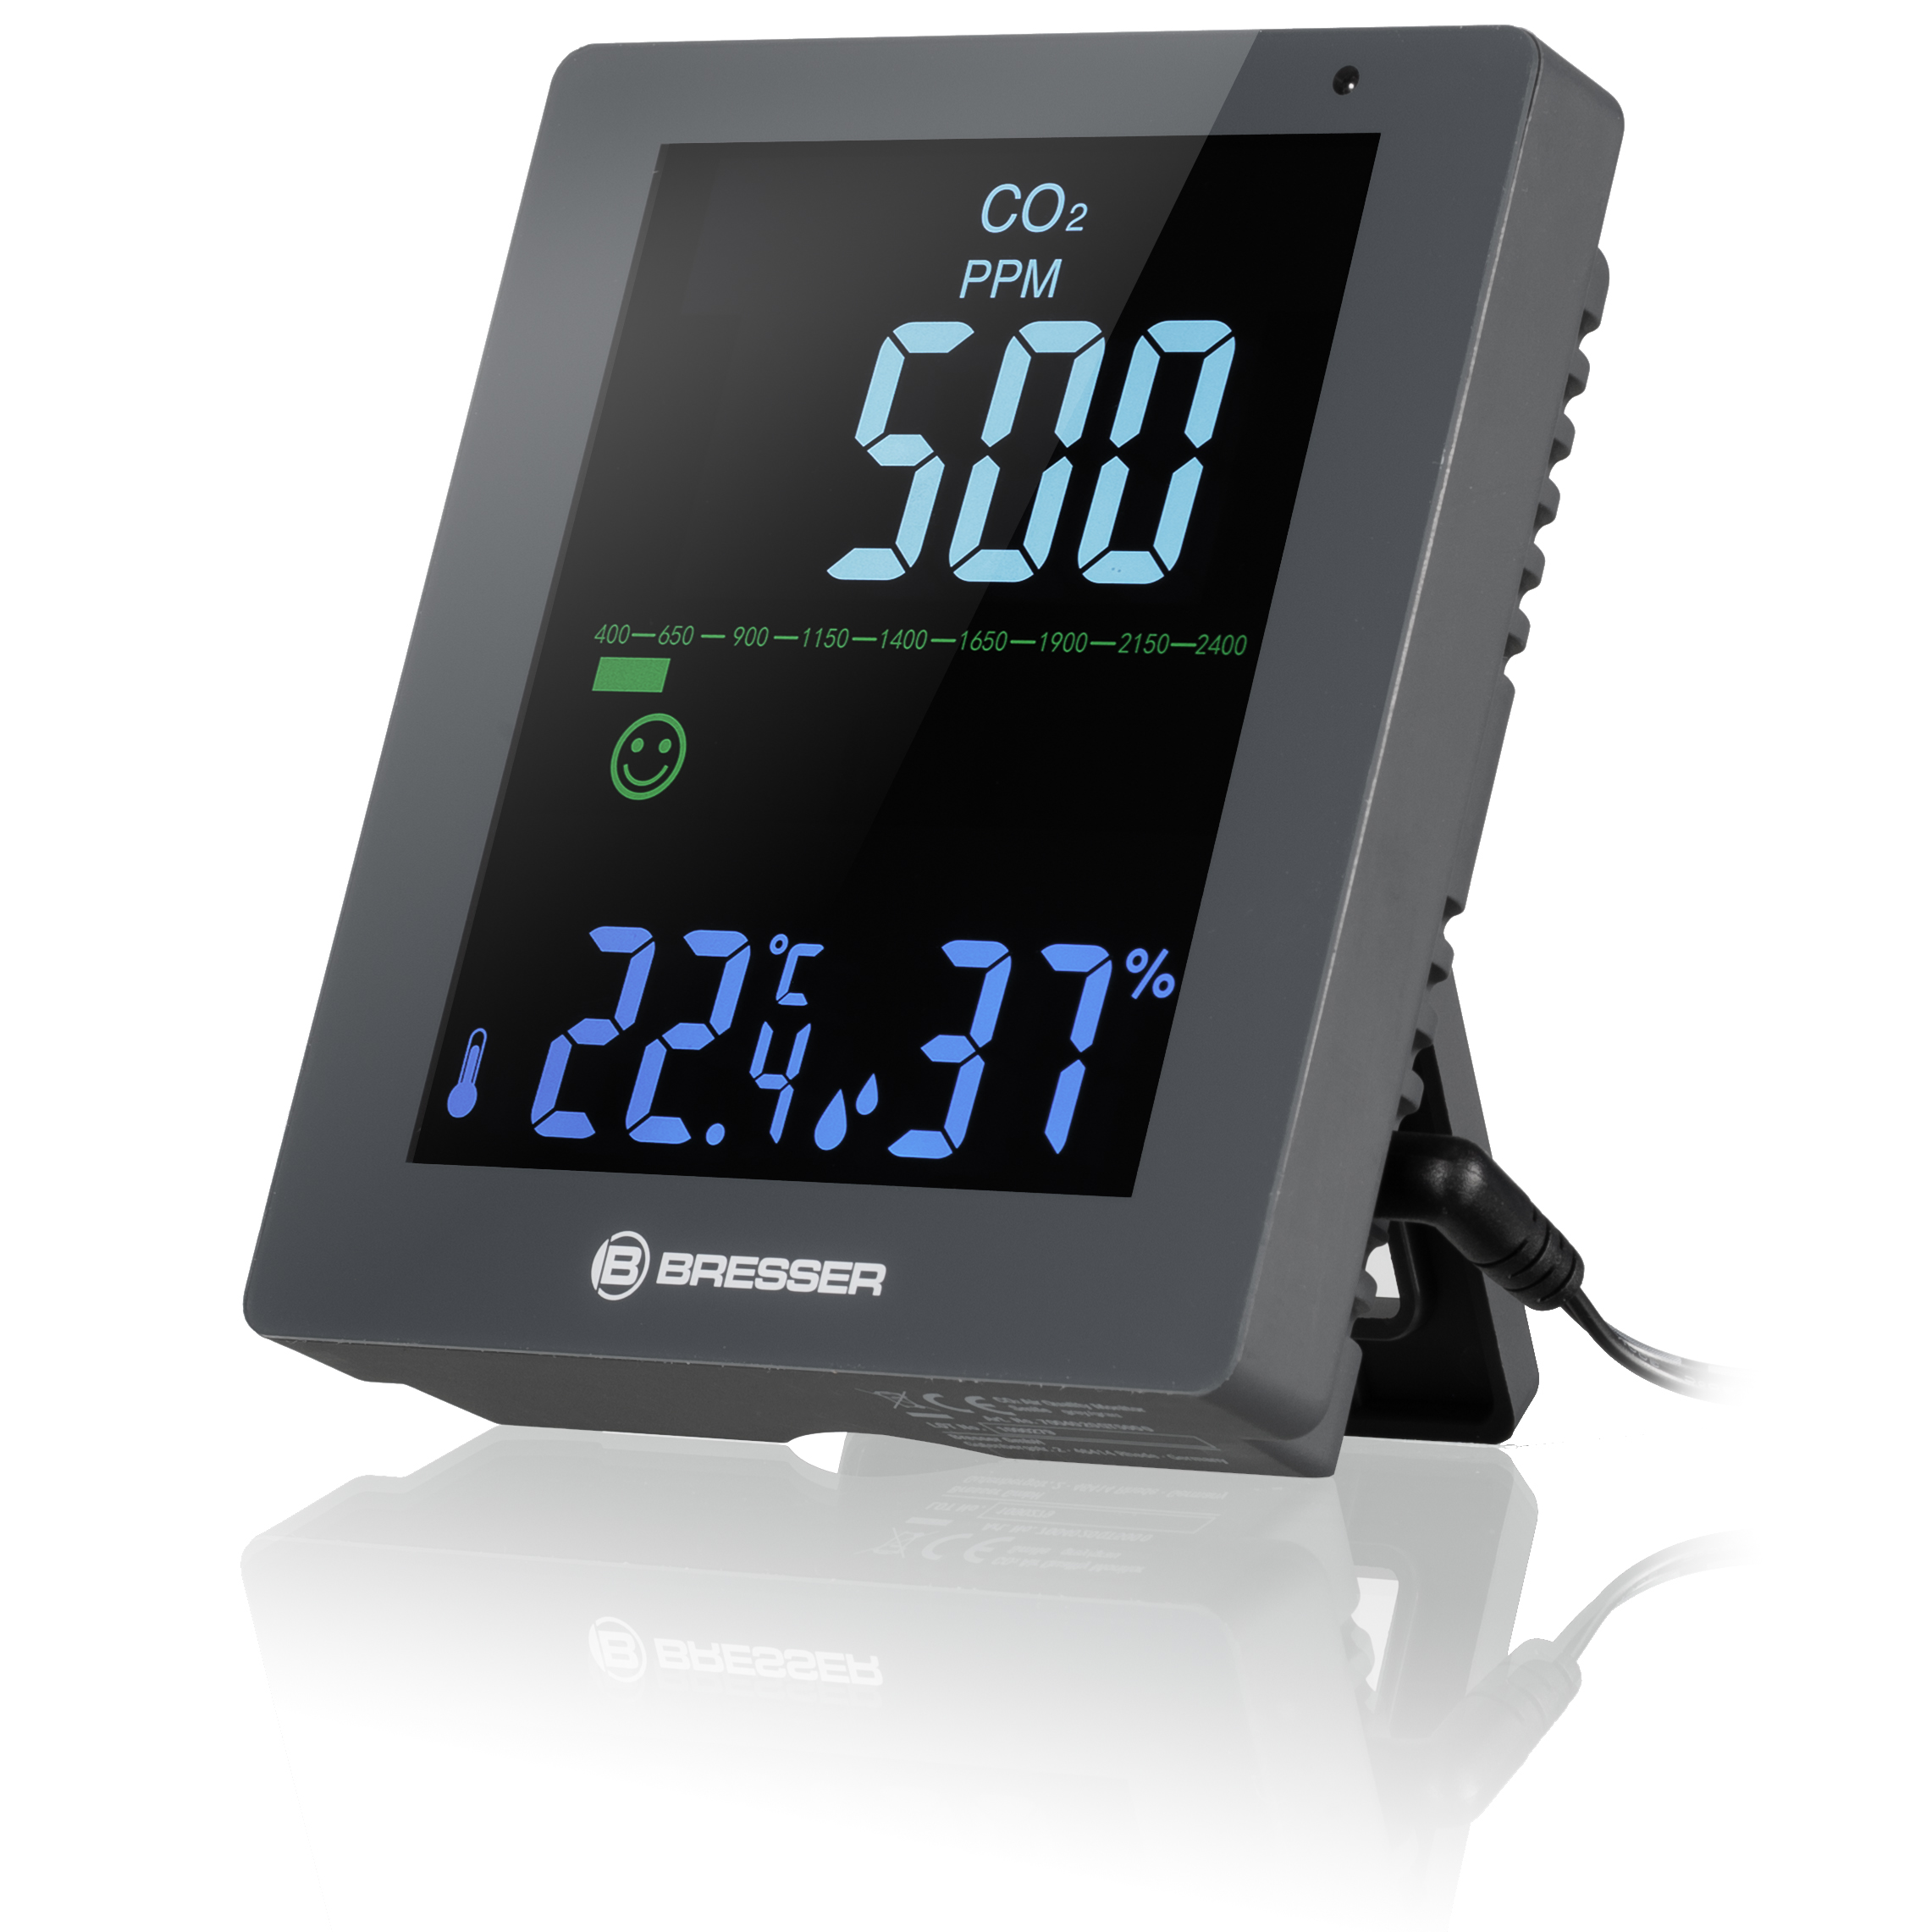 BRESSER CO² Air Quality Monitor Smile (Refurbished)